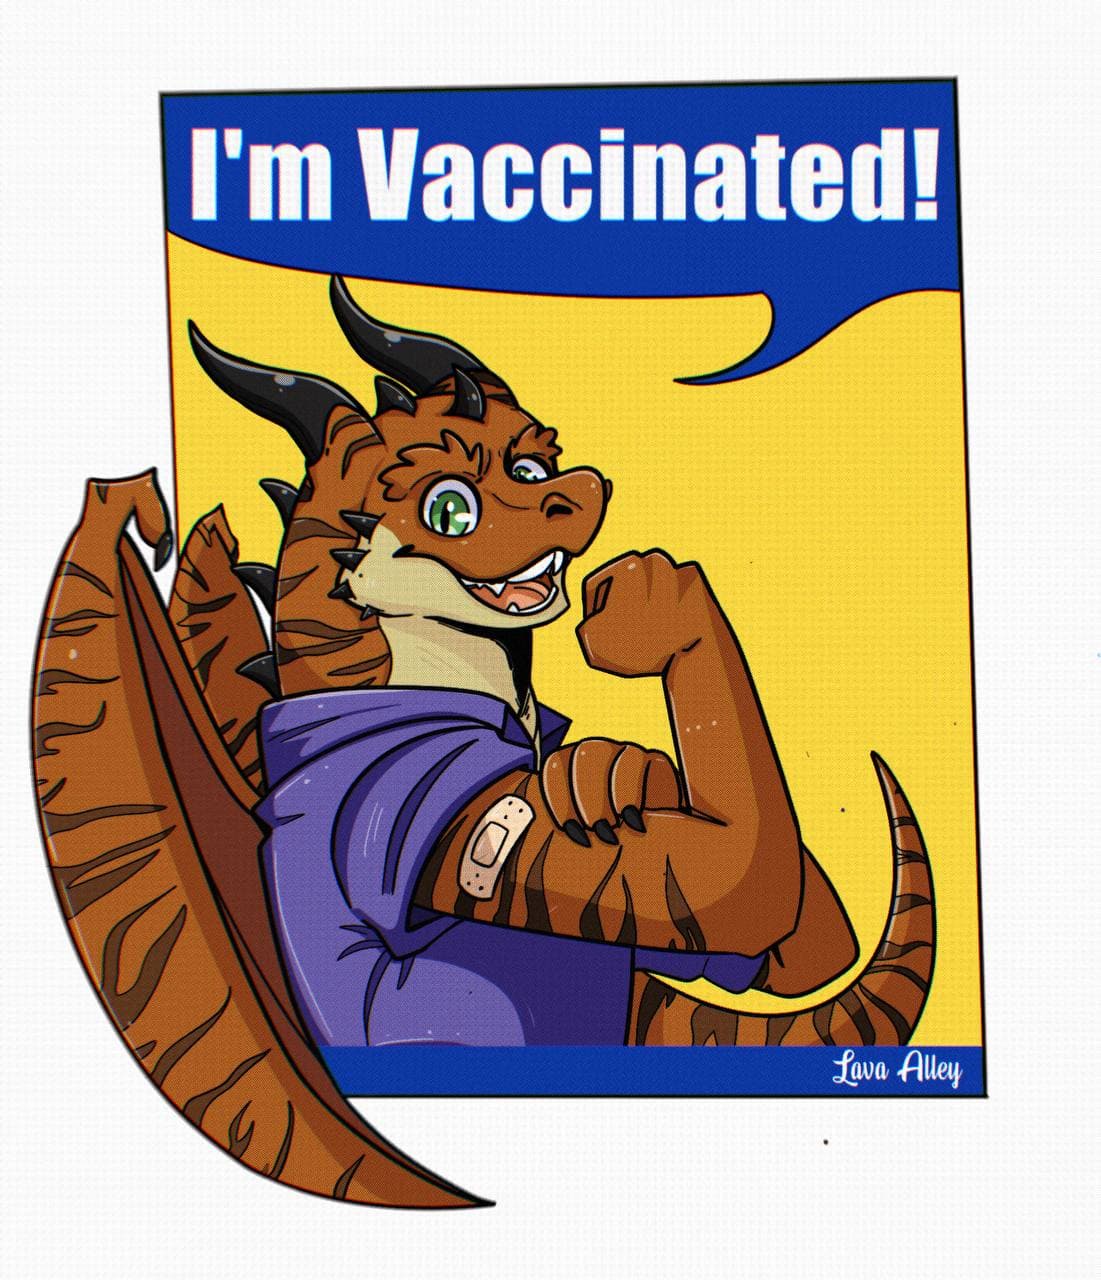 I am vaccinated!